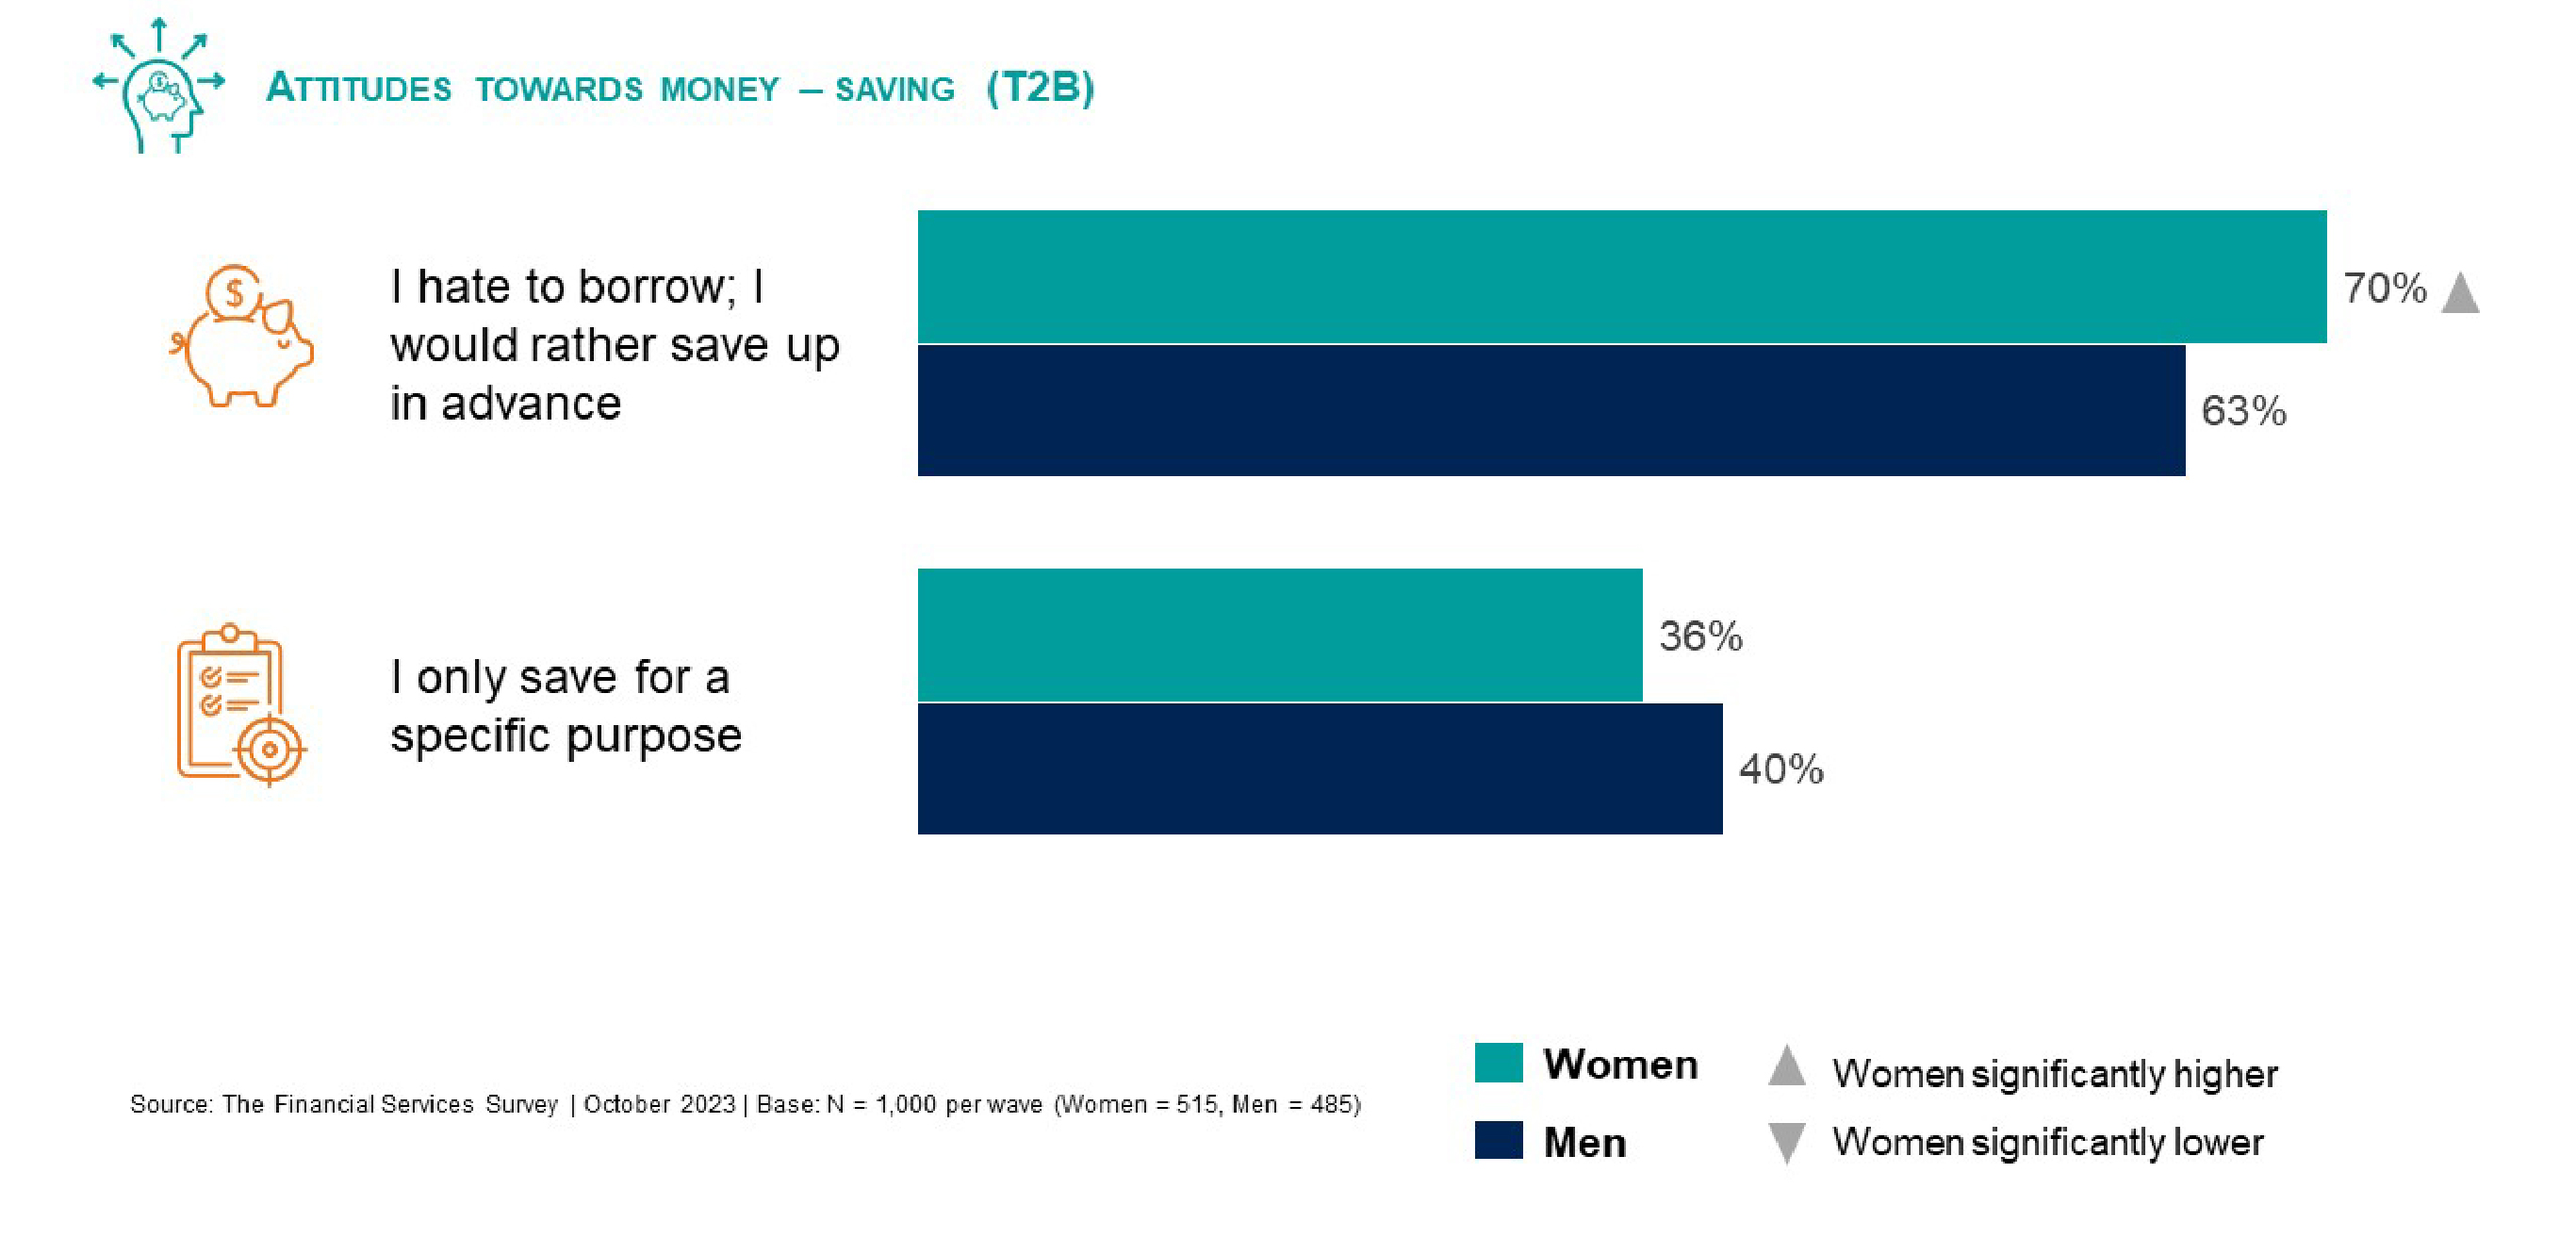 While Hong Kong women earn 10% less than men, they hold relatively more liquid assets.